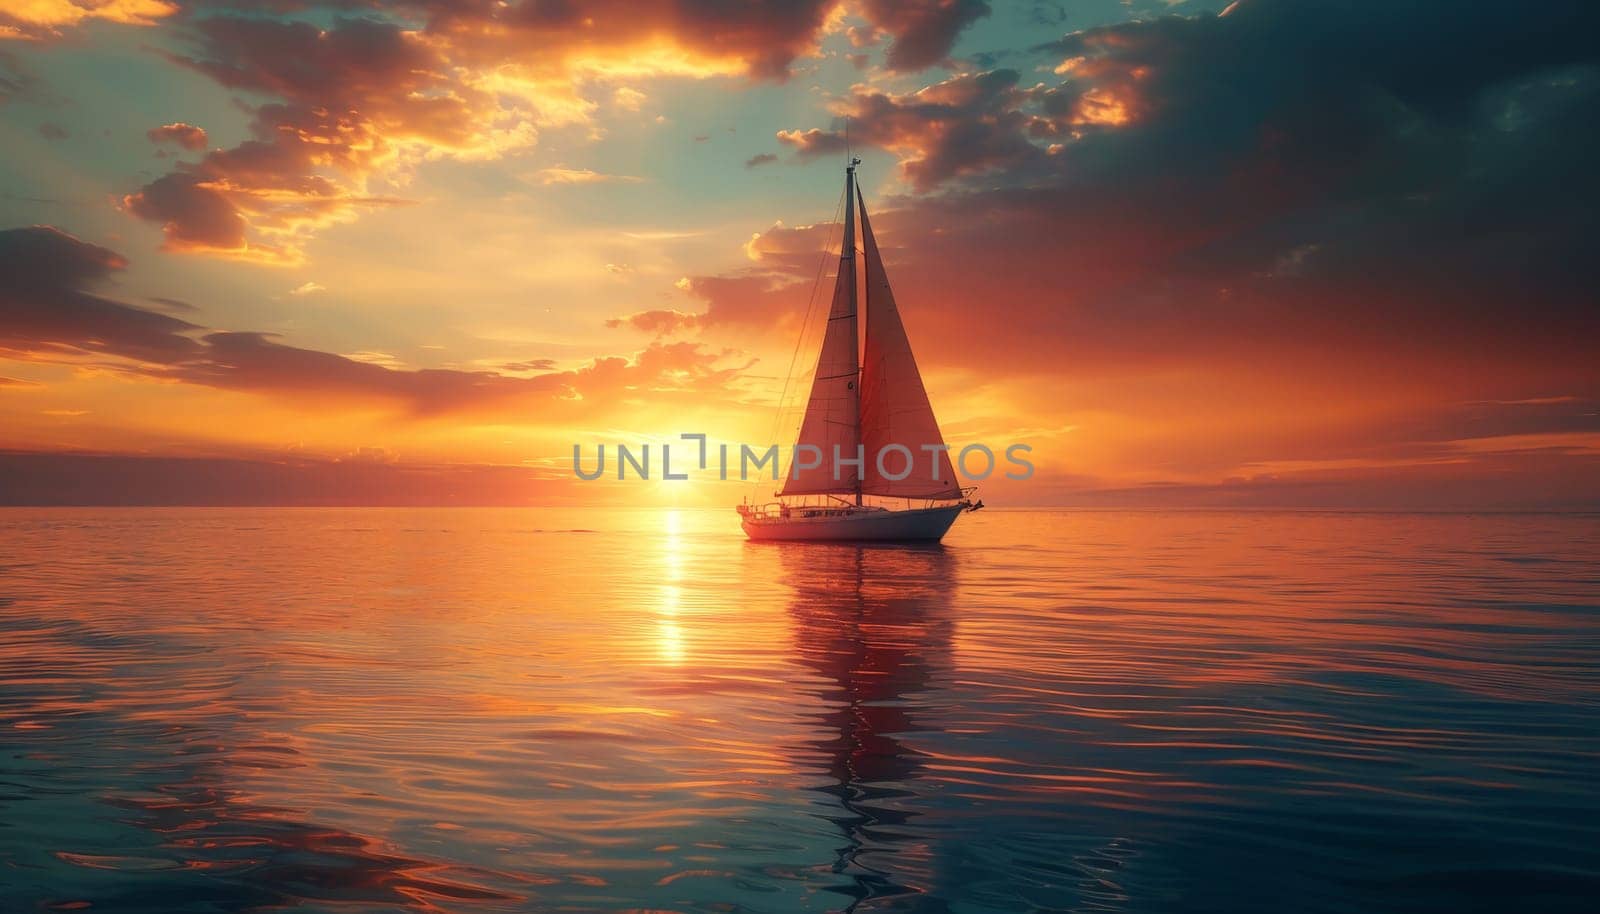 A sailboat is sailing on a calm ocean at sunset by nateemee